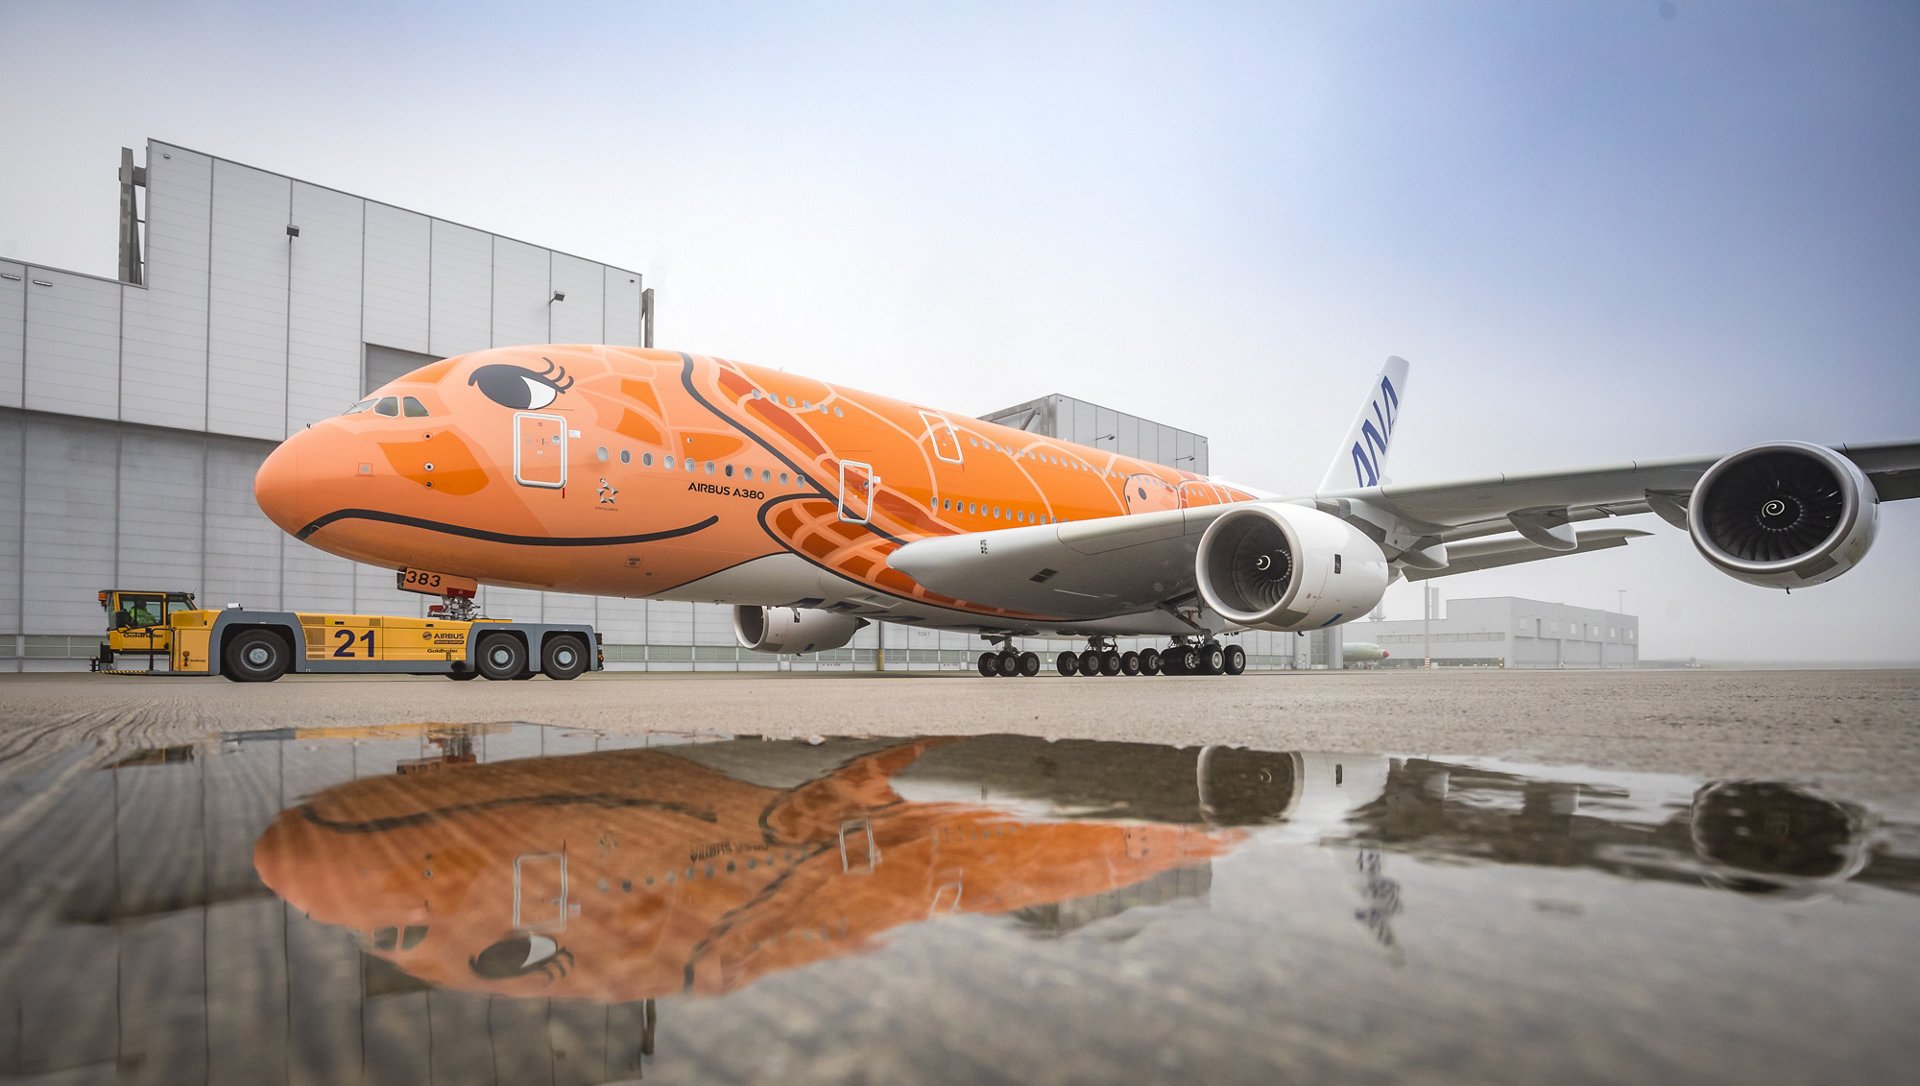 ANA took delivery of its third and last Airbus A380 » Nicolas Larenas